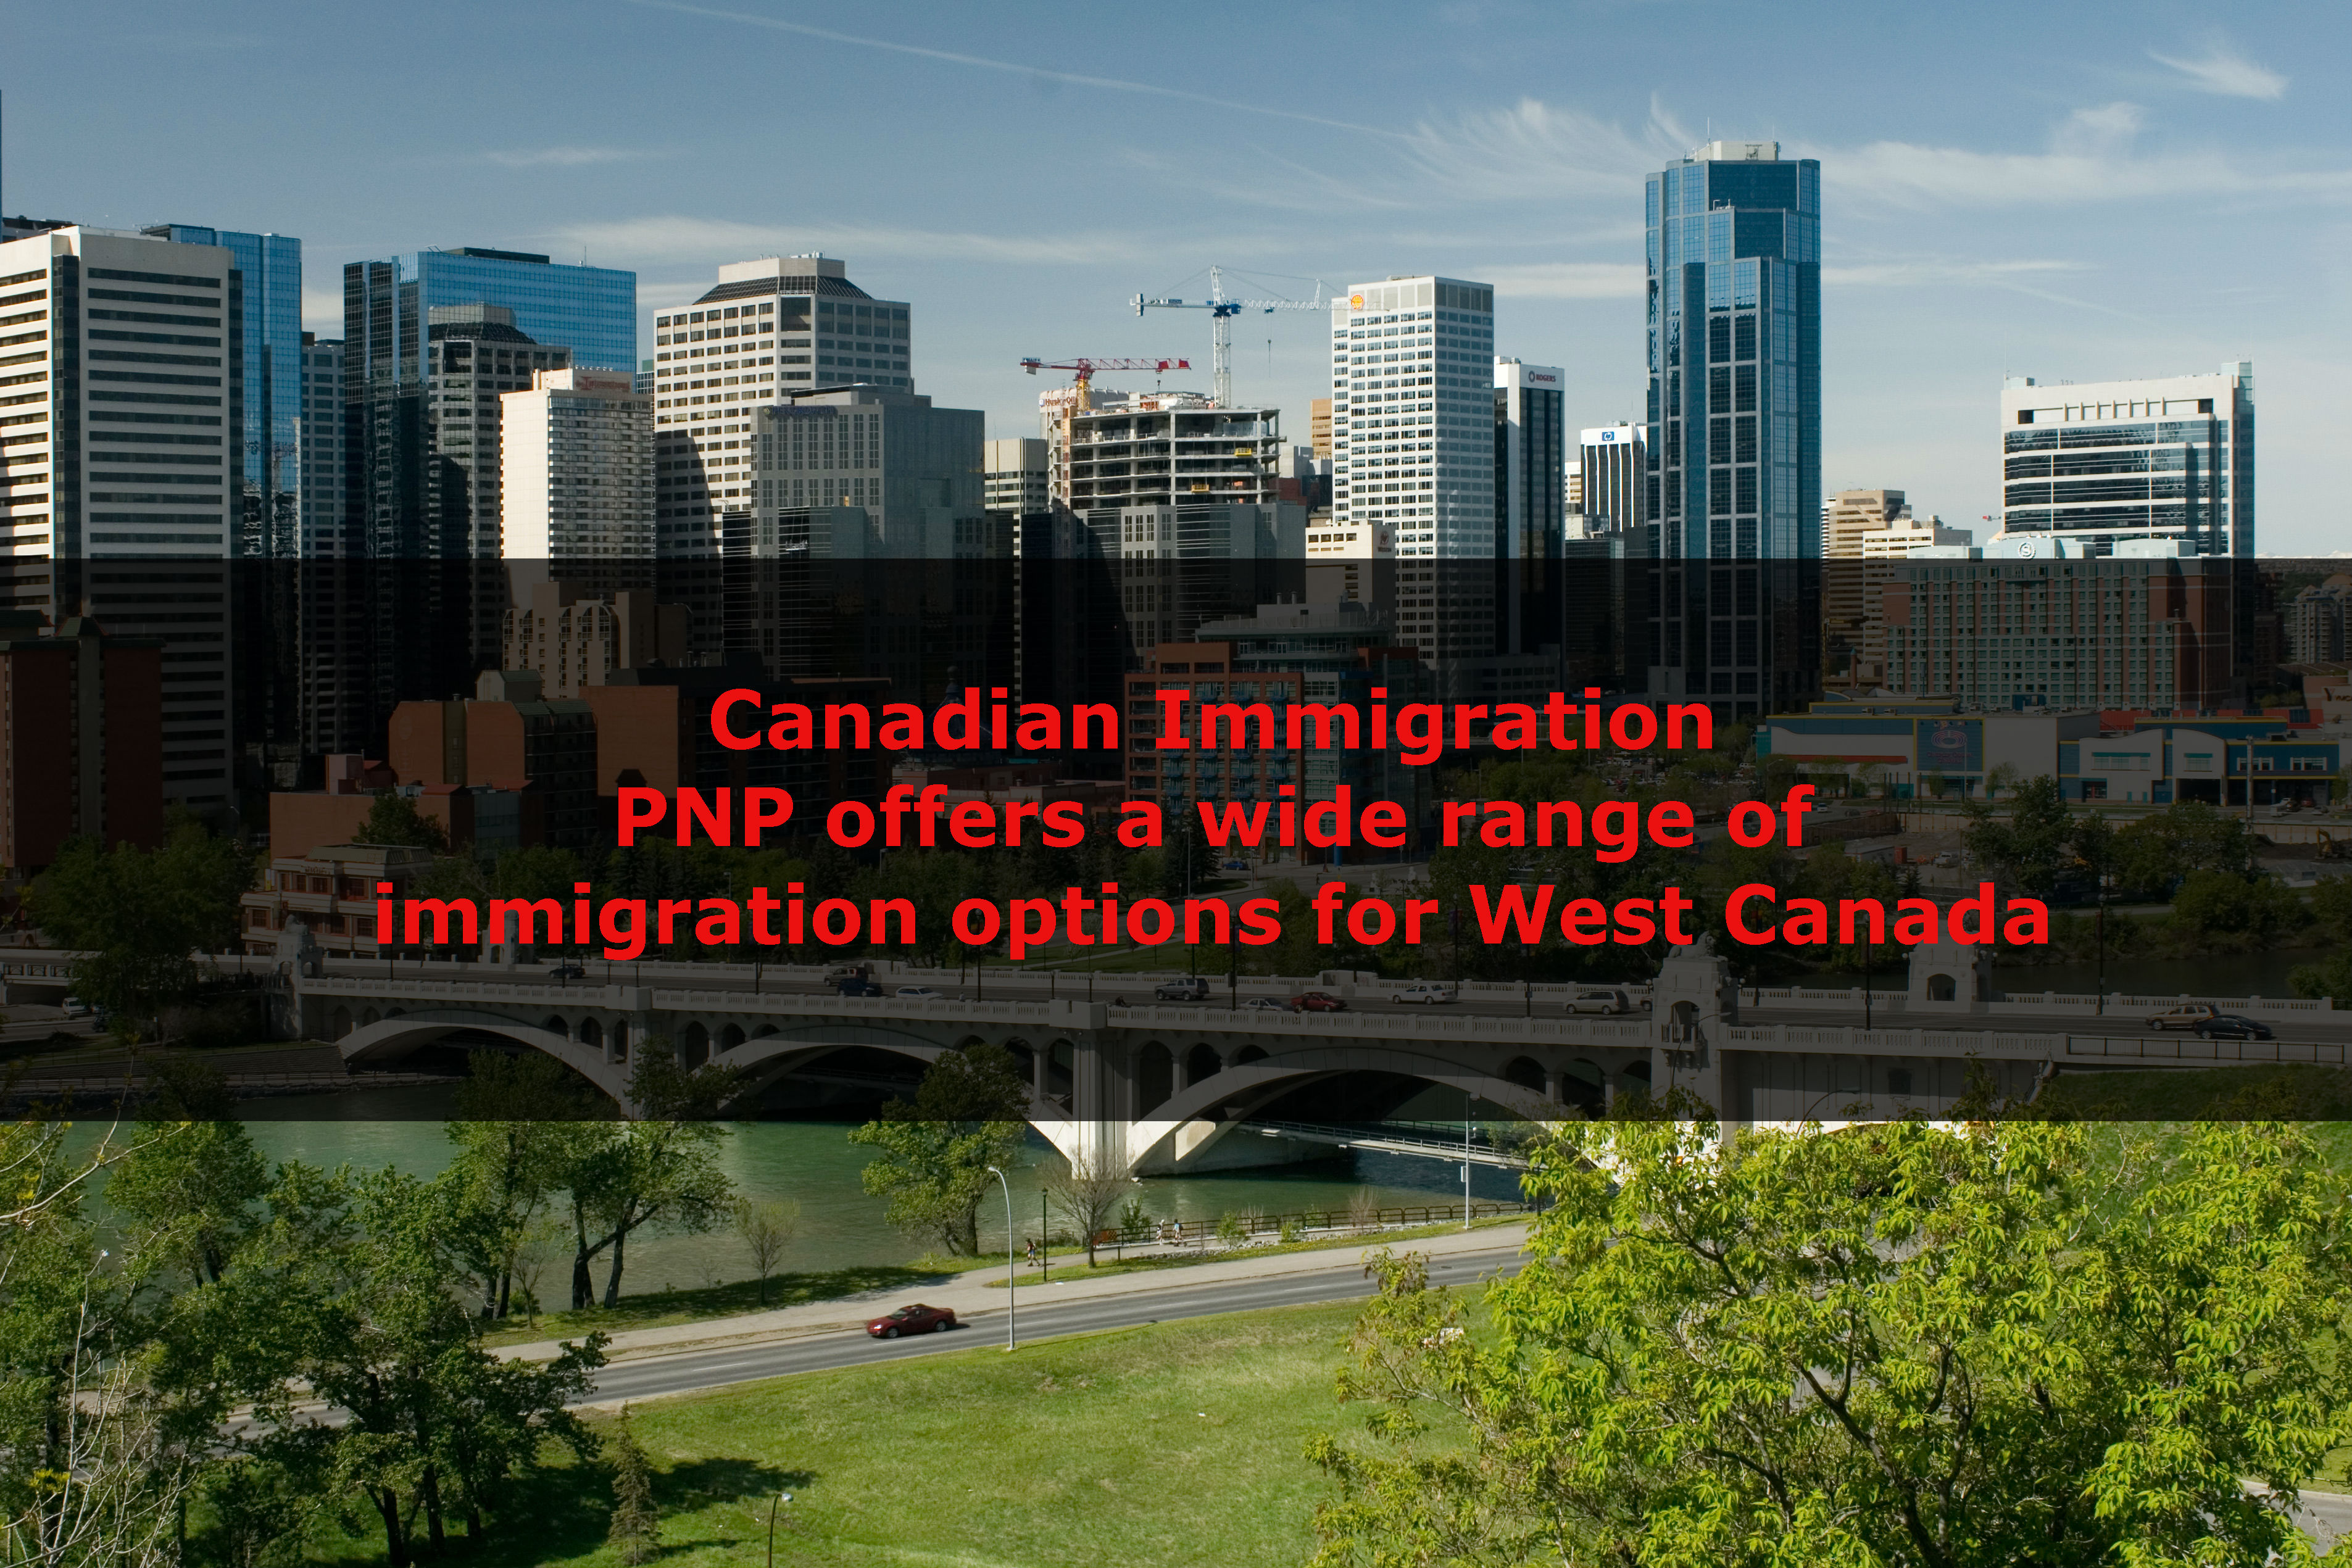 Canadian Immigration – PNP offers a wide range of immigration options for West Canada